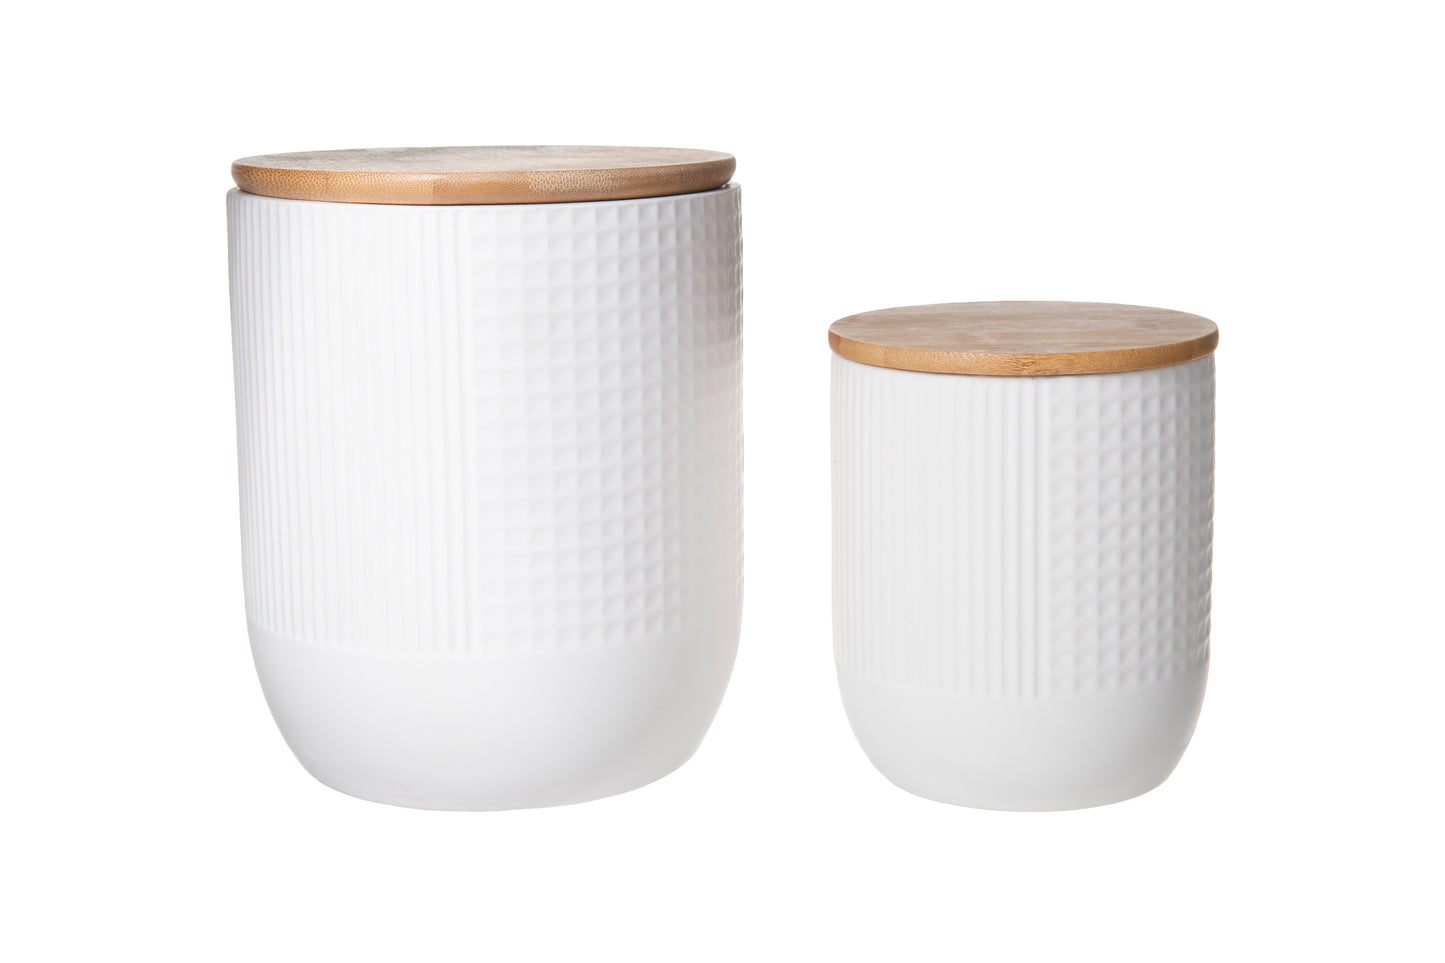 Ceramic Canister with Bamboo Lid, Combination Pattern Design